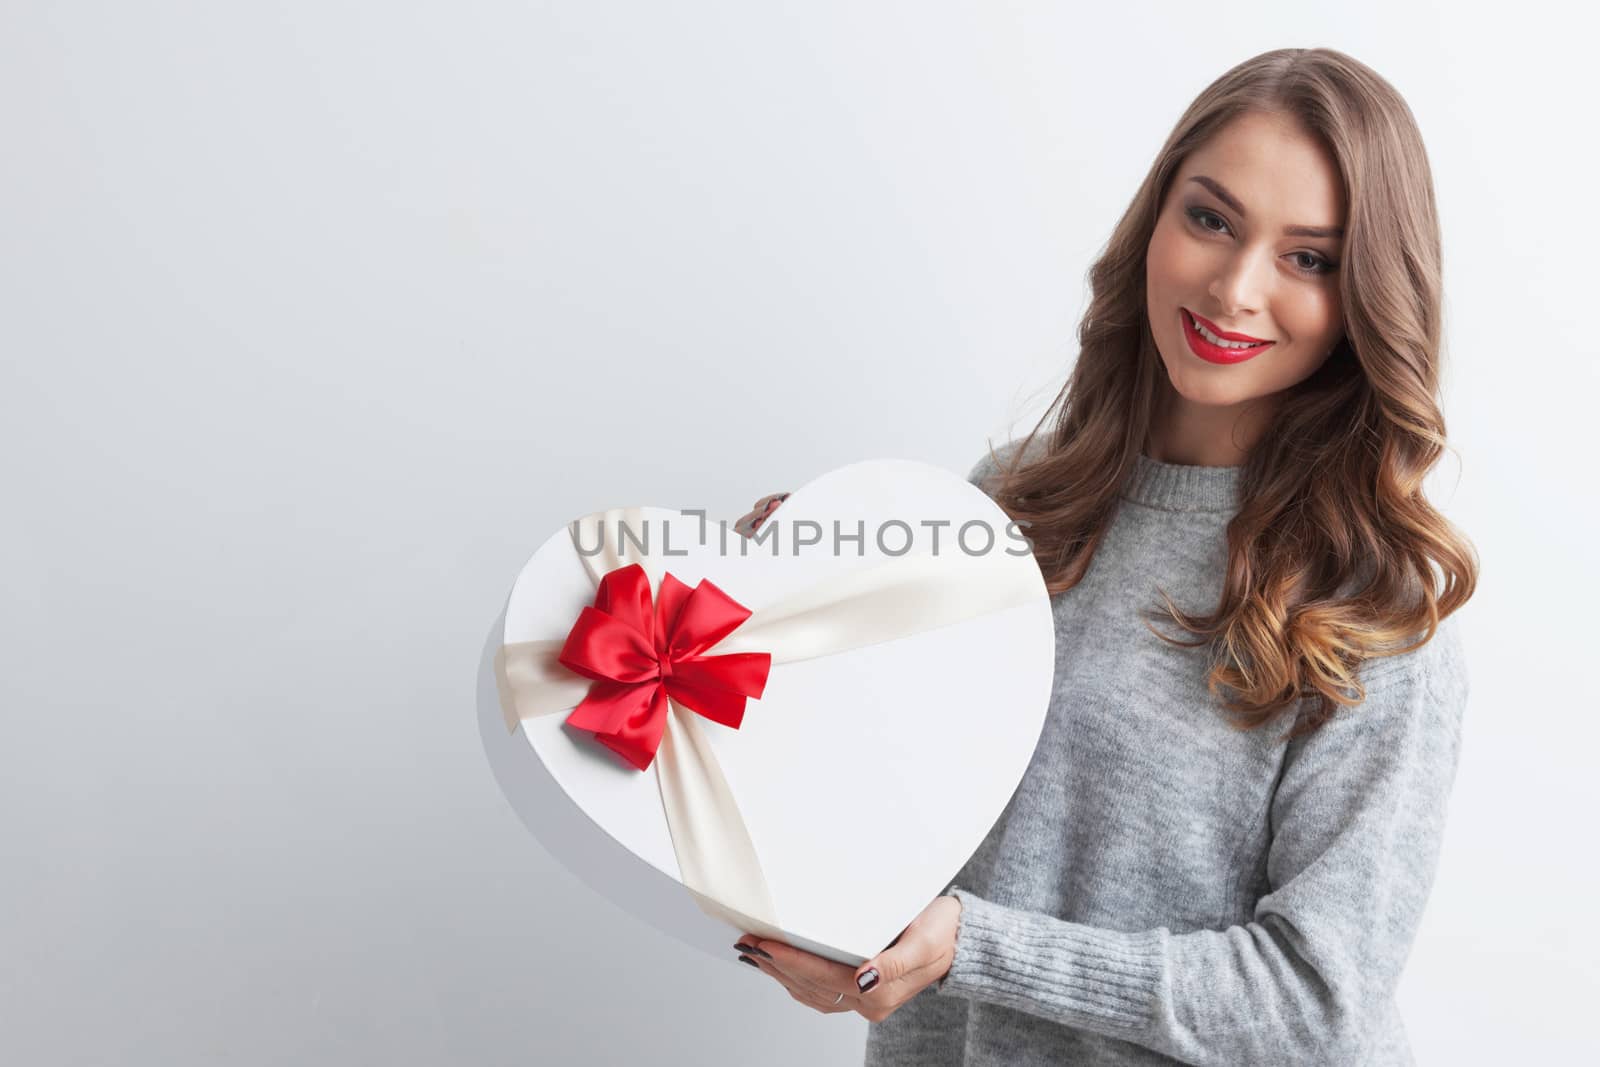 Young girl with red heart-shaped gift box on white background